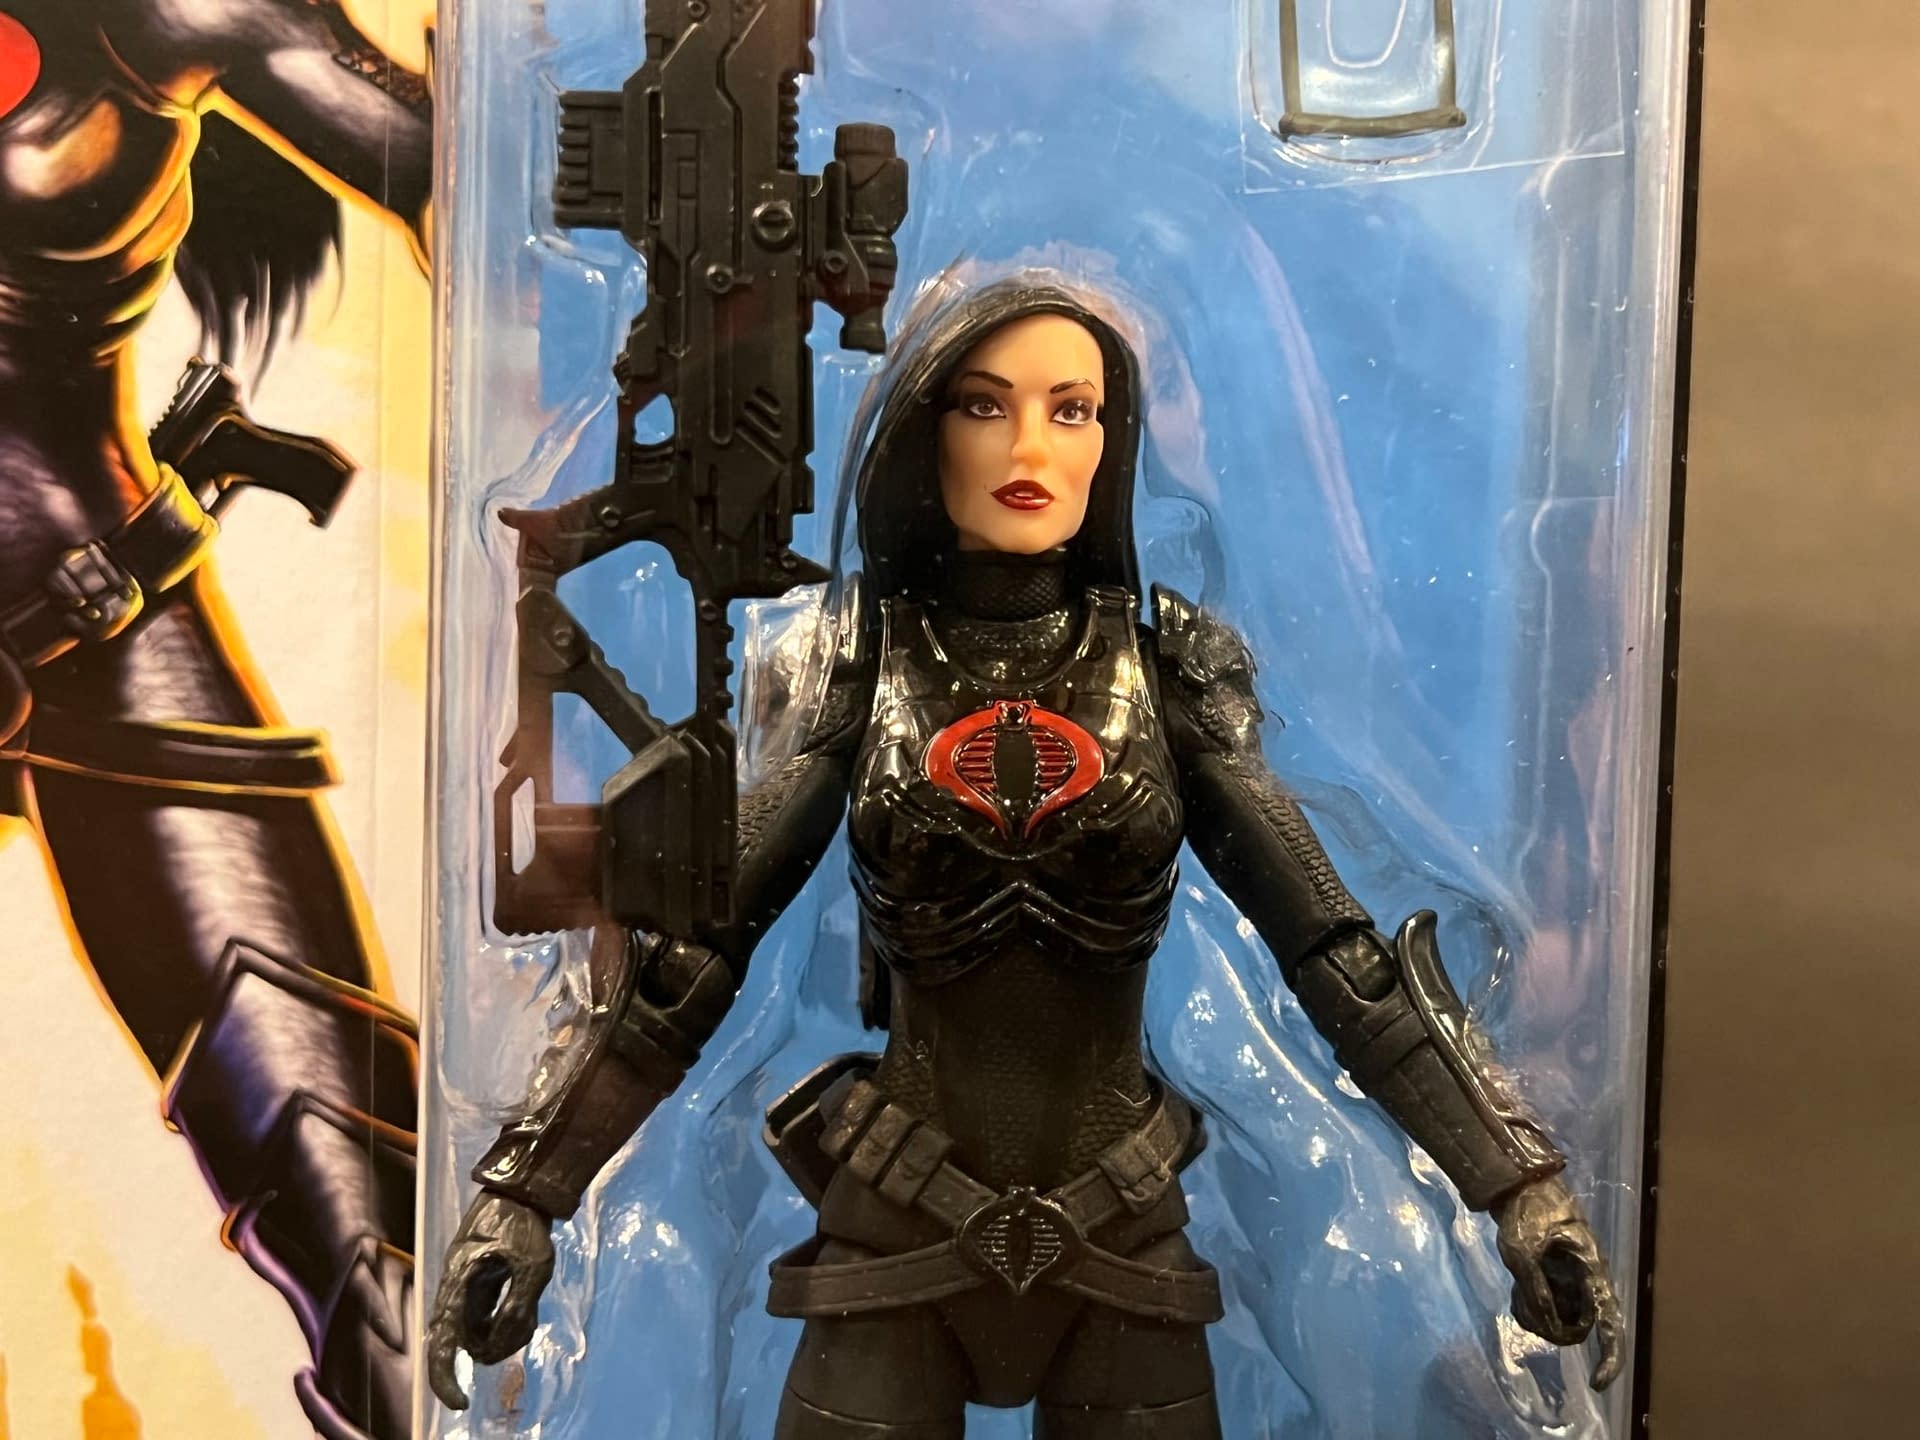 GI Joe Week: We Take A Look At The Latest Retro Offerings